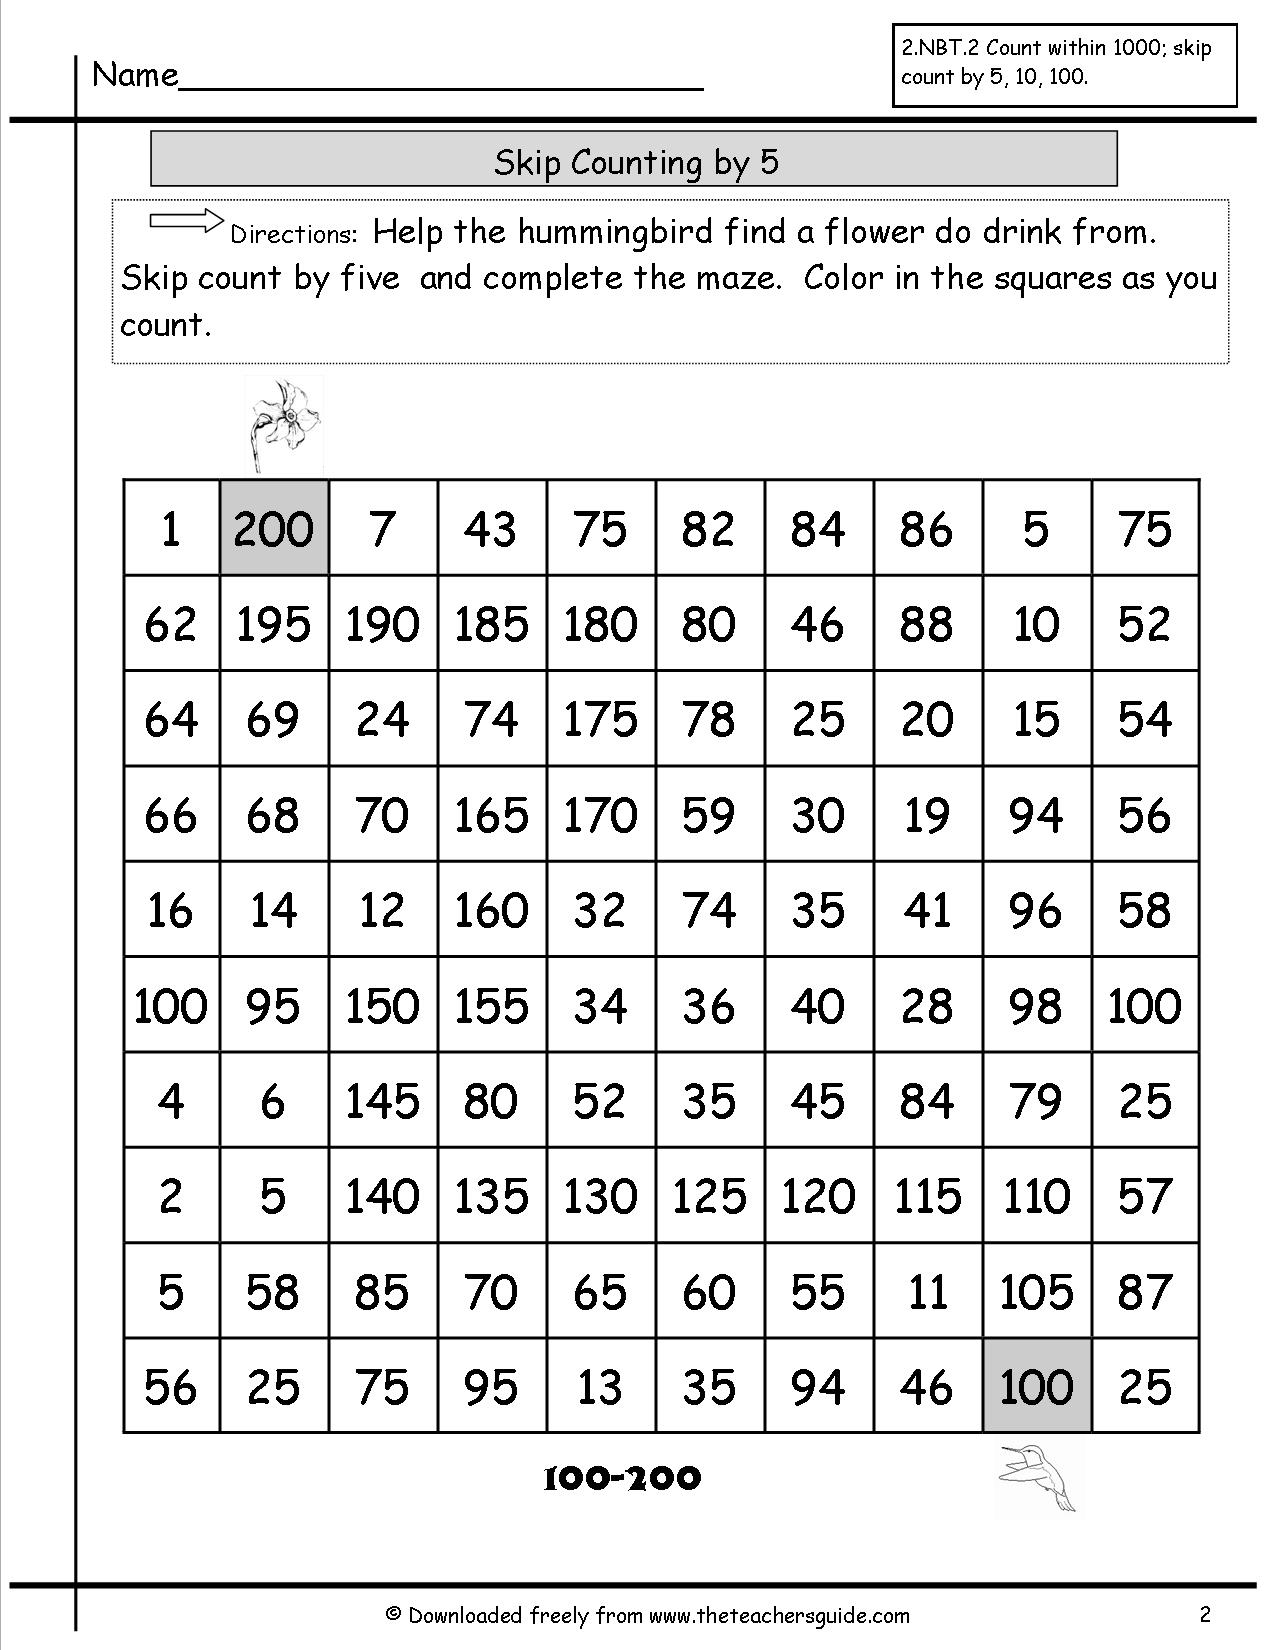 Skip Counting by 5 to 100 Worksheets Image